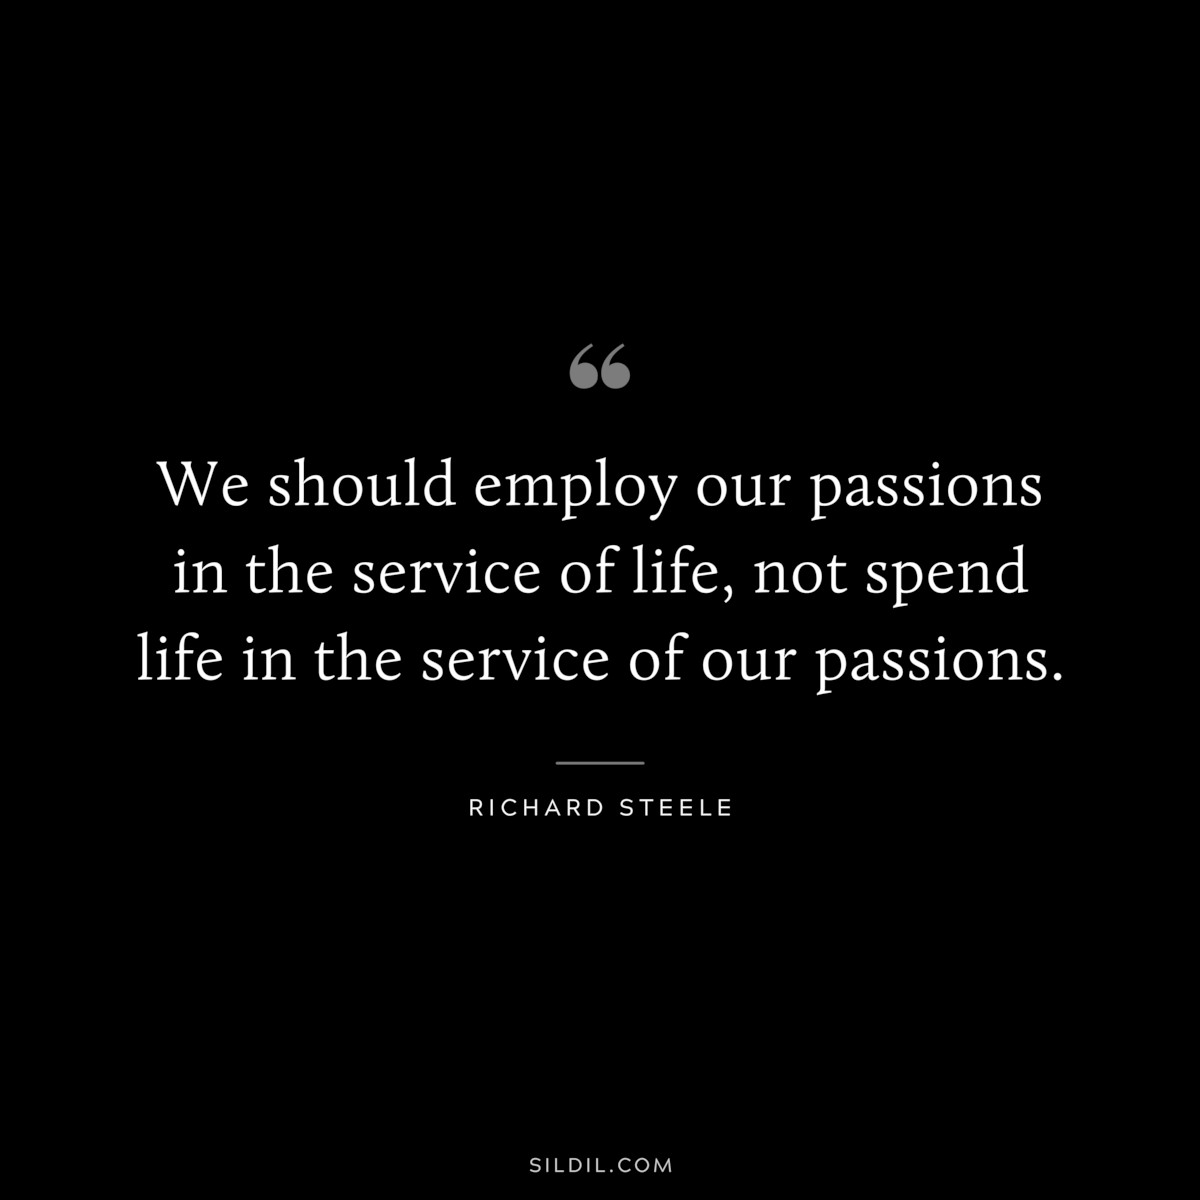 We should employ our passions in the service of life, not spend life in the service of our passions. ― Richard Steele